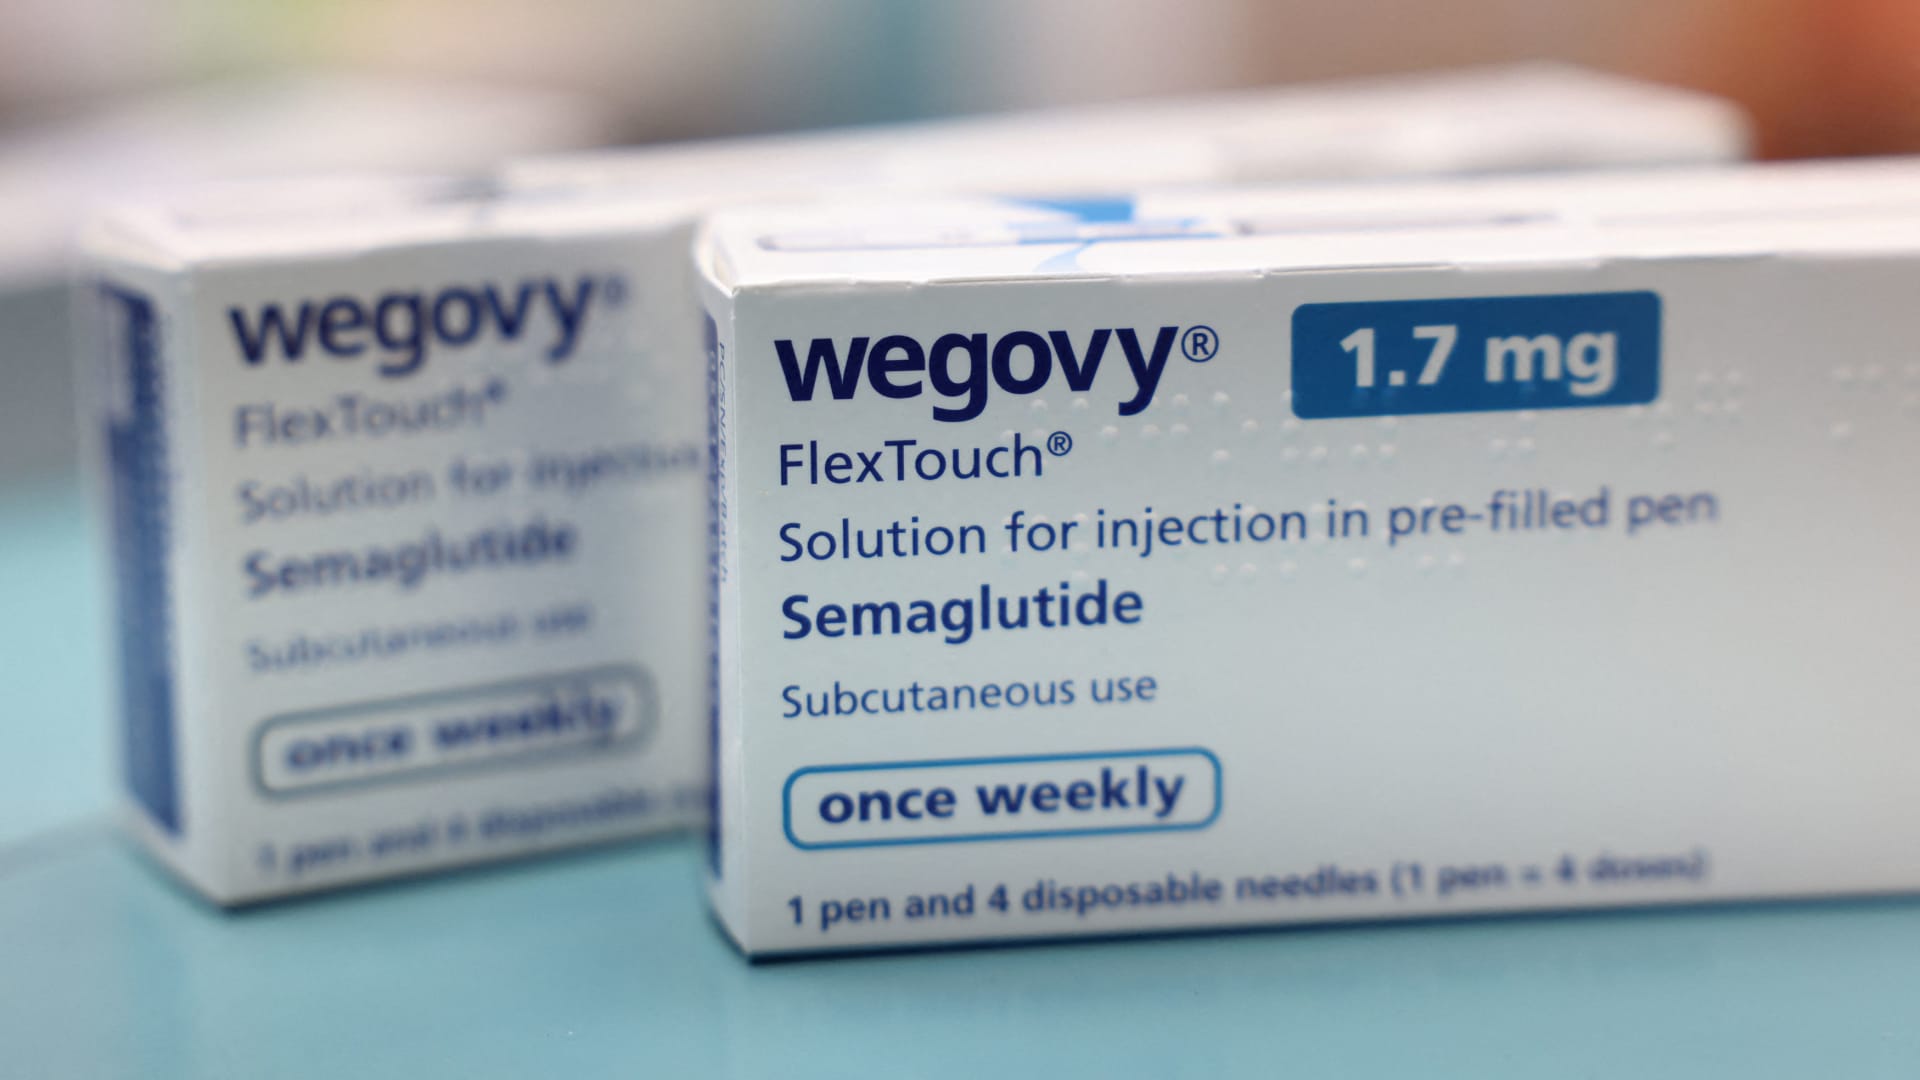 People on Novo Nordisk’s Wegovy maintain weight loss for up to four years, study says